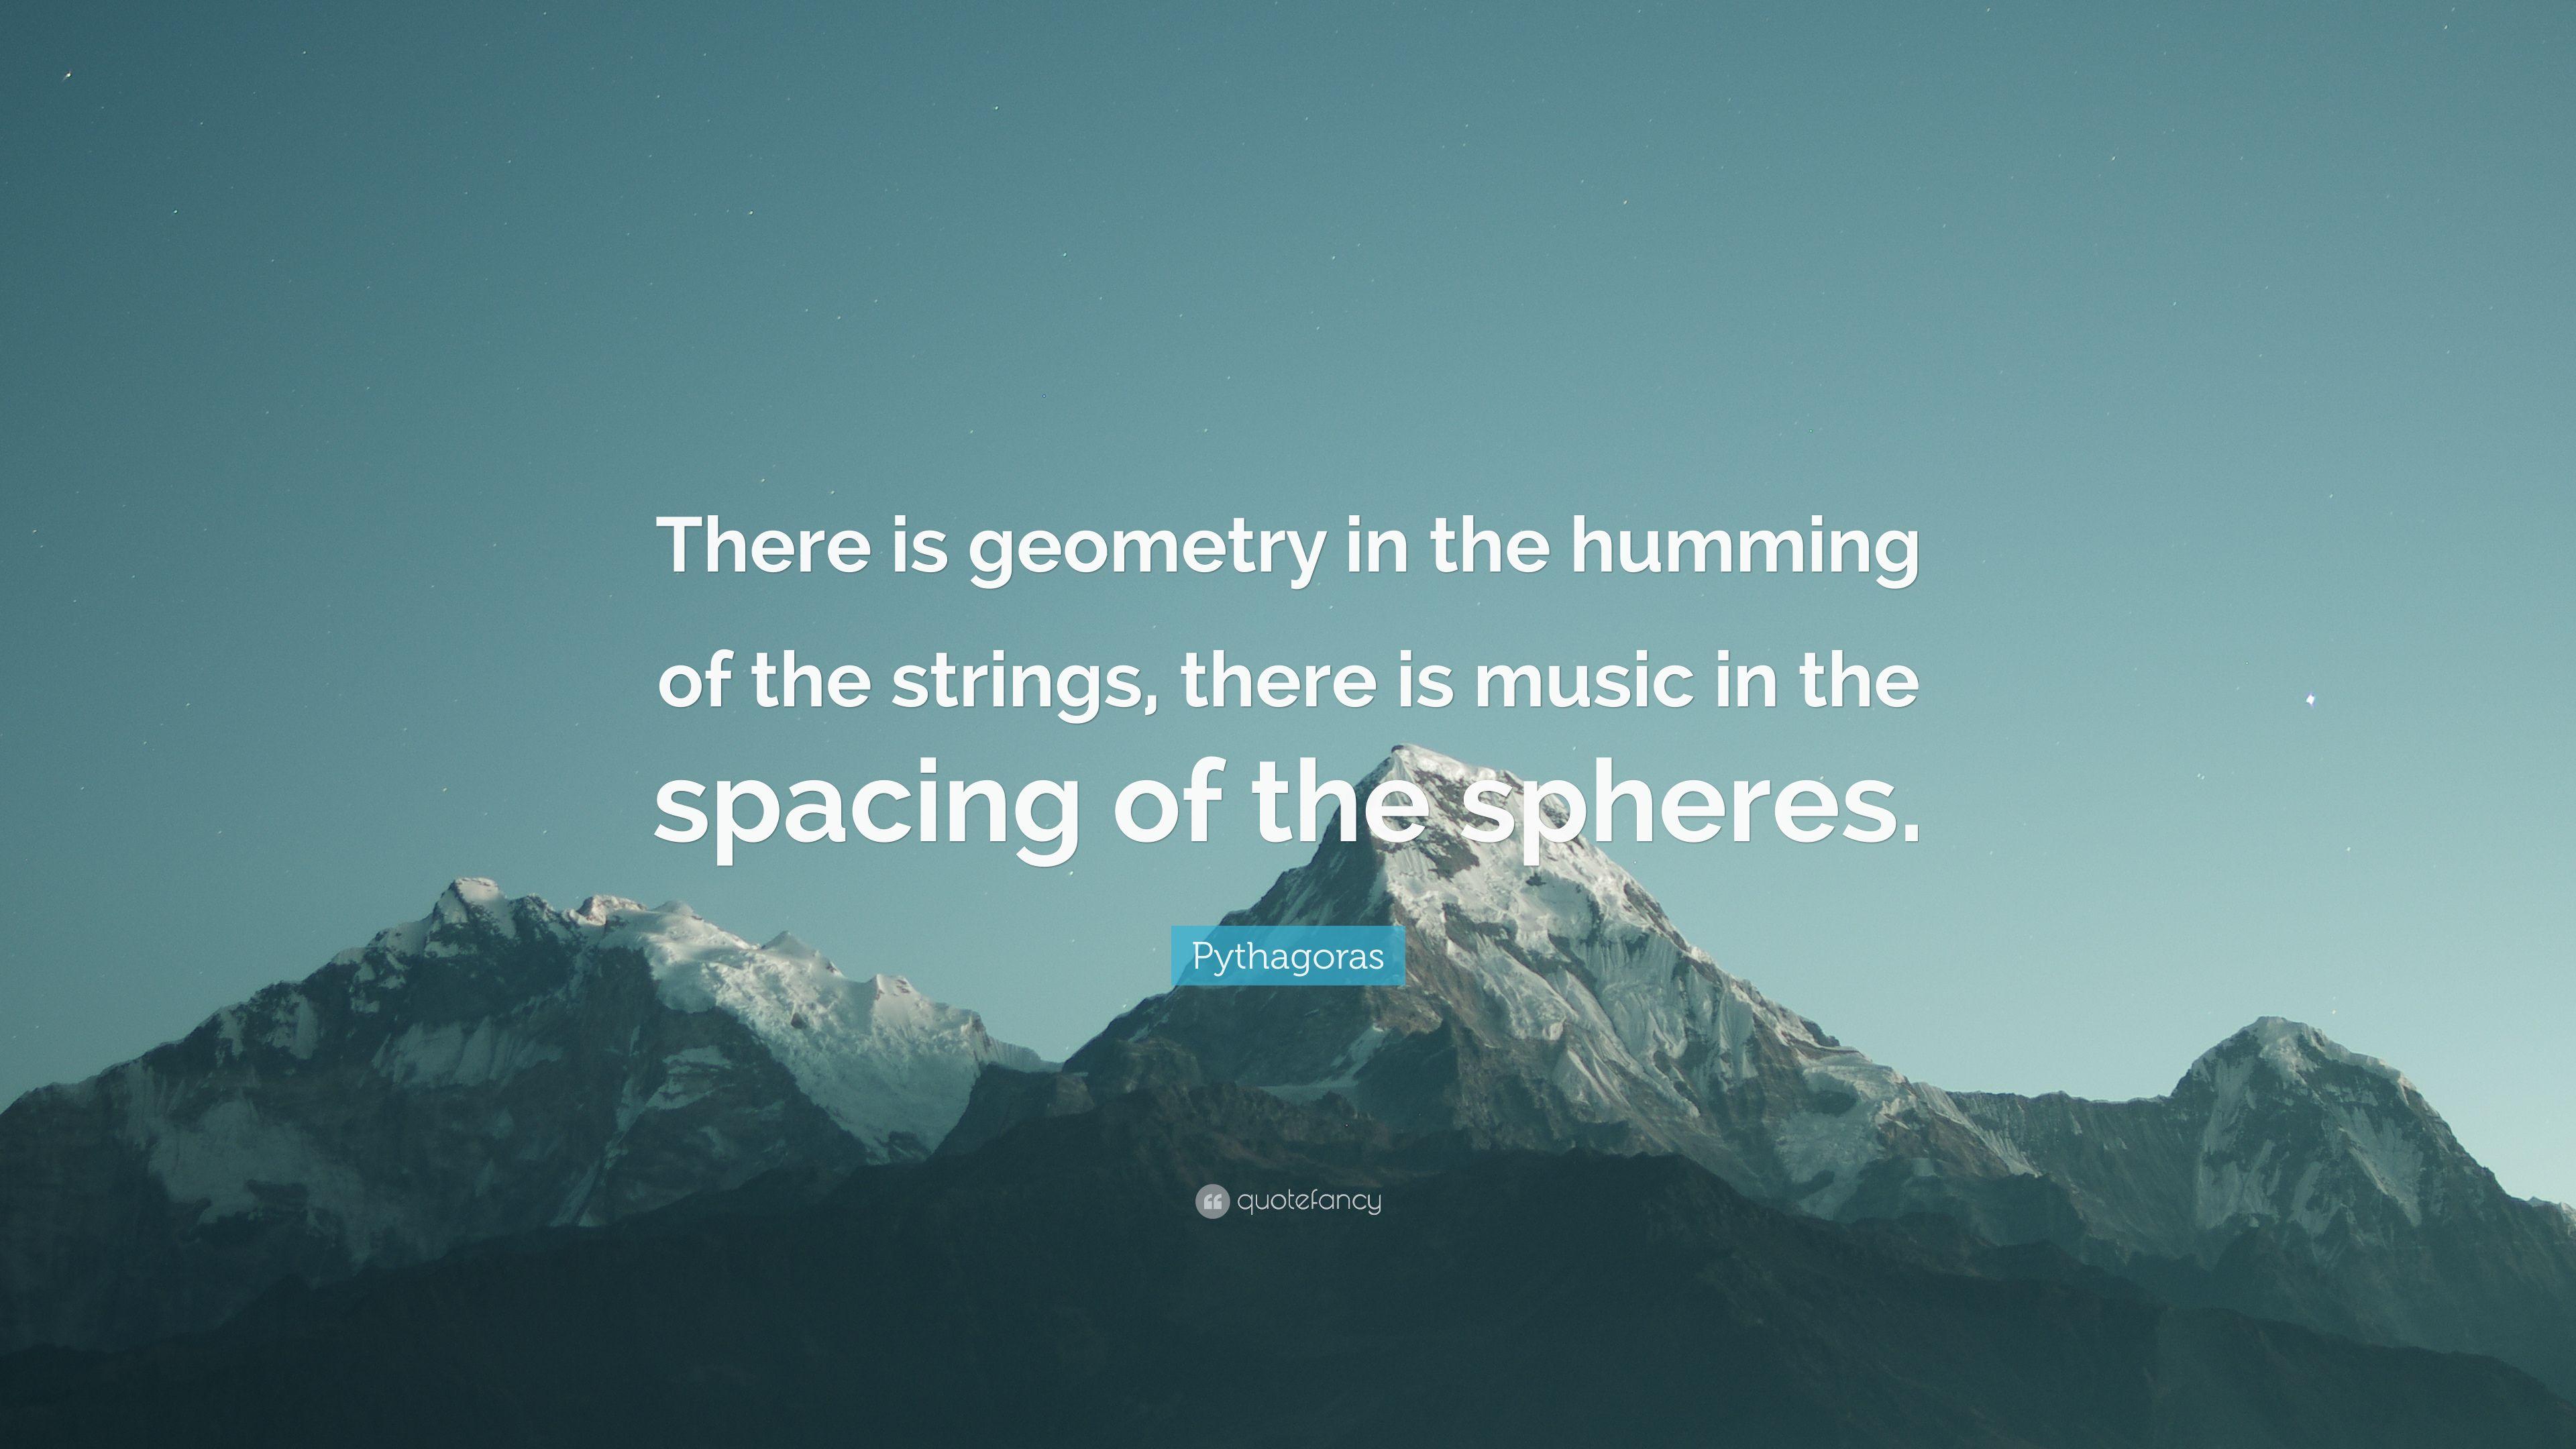 Pythagoras Quote: “There is geometry in the humming of the strings